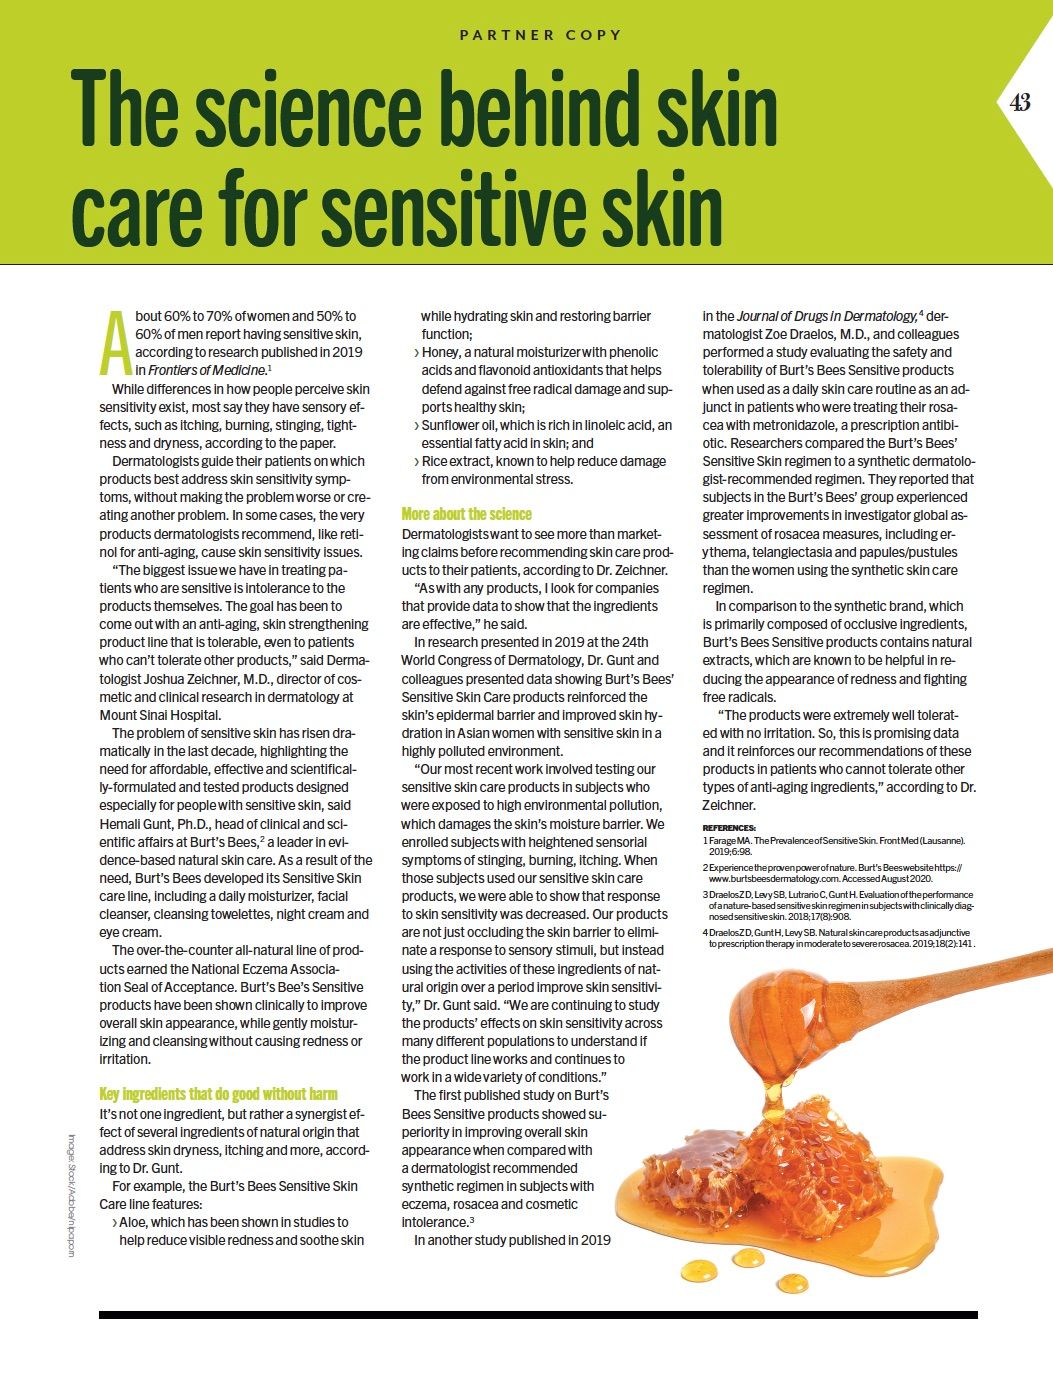 the science behind skin care for sensitive skin